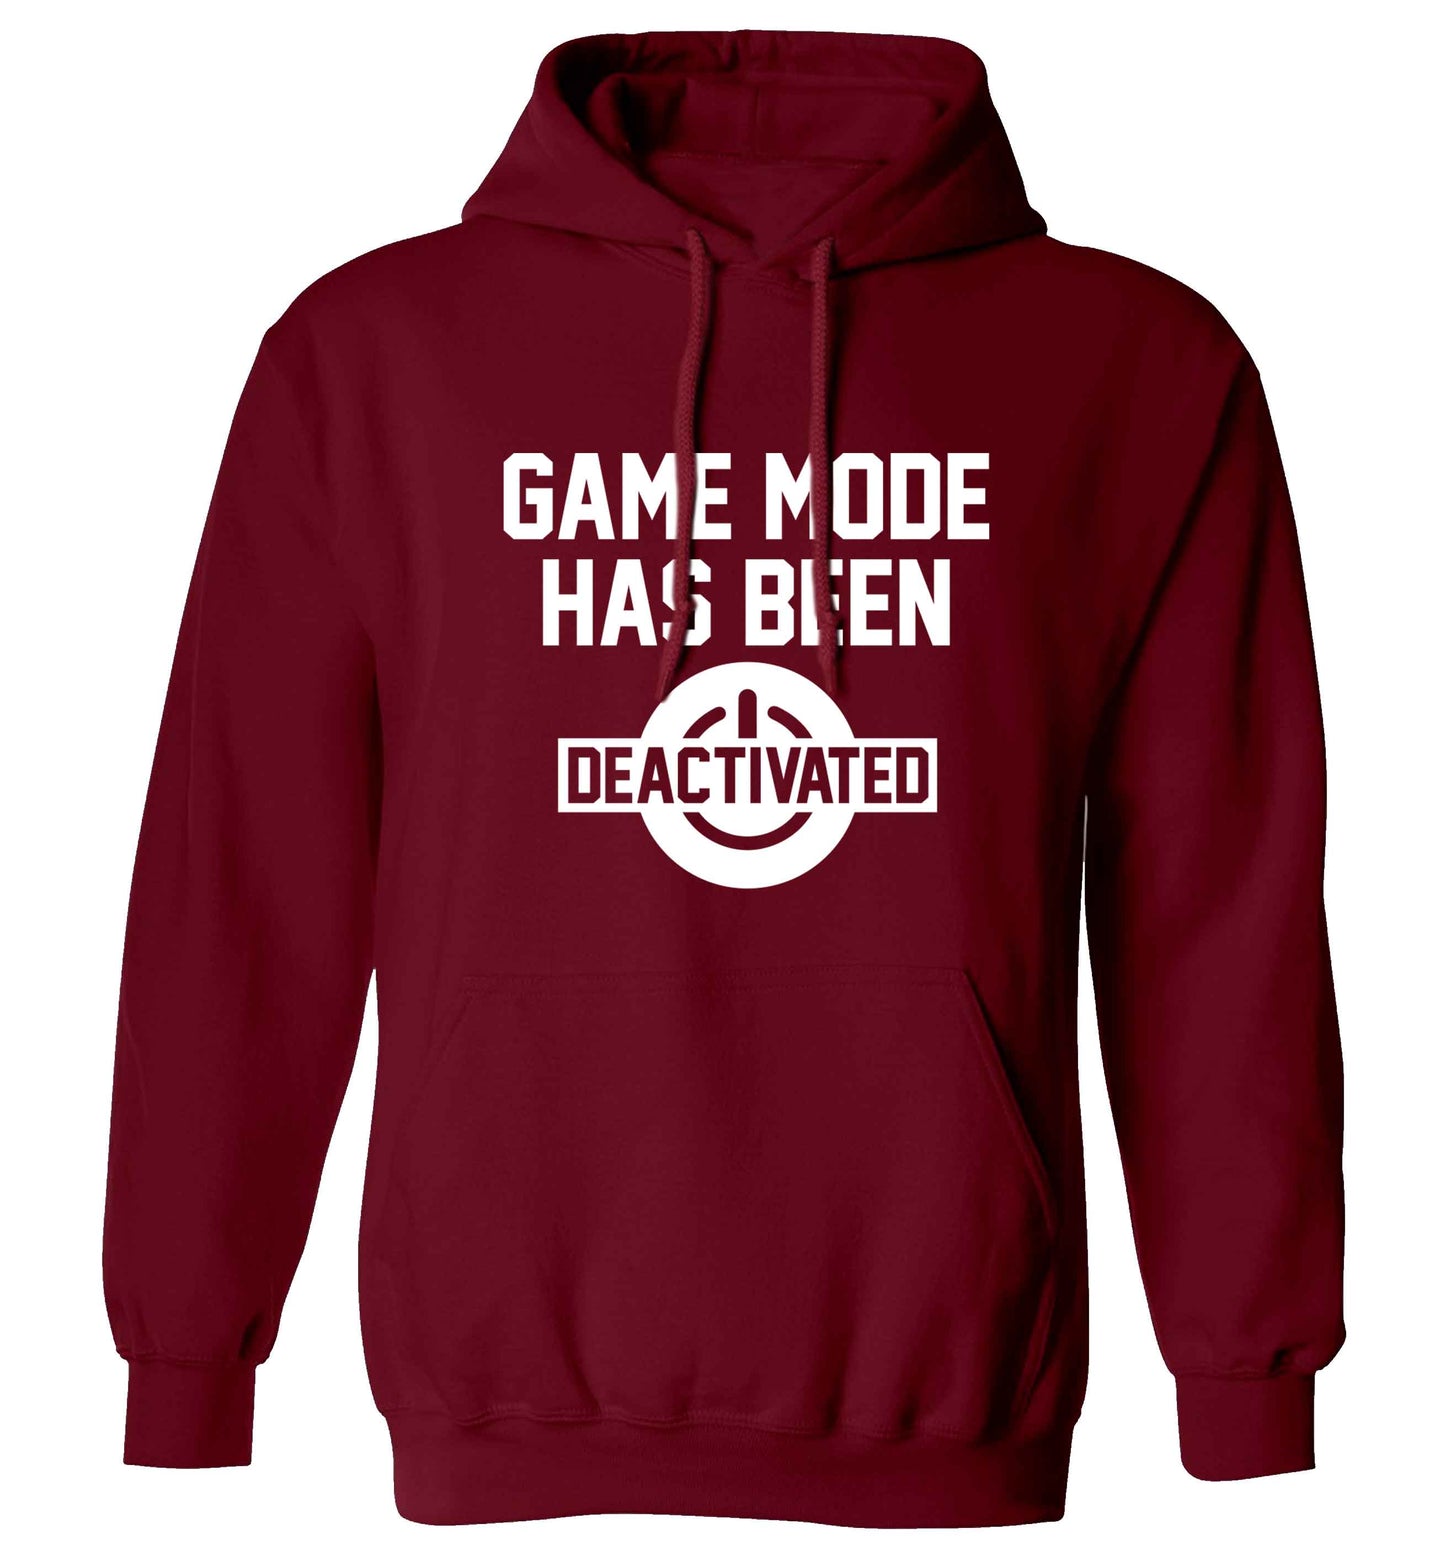 Game Mode Has Been Deactivated adults unisex maroon hoodie 2XL